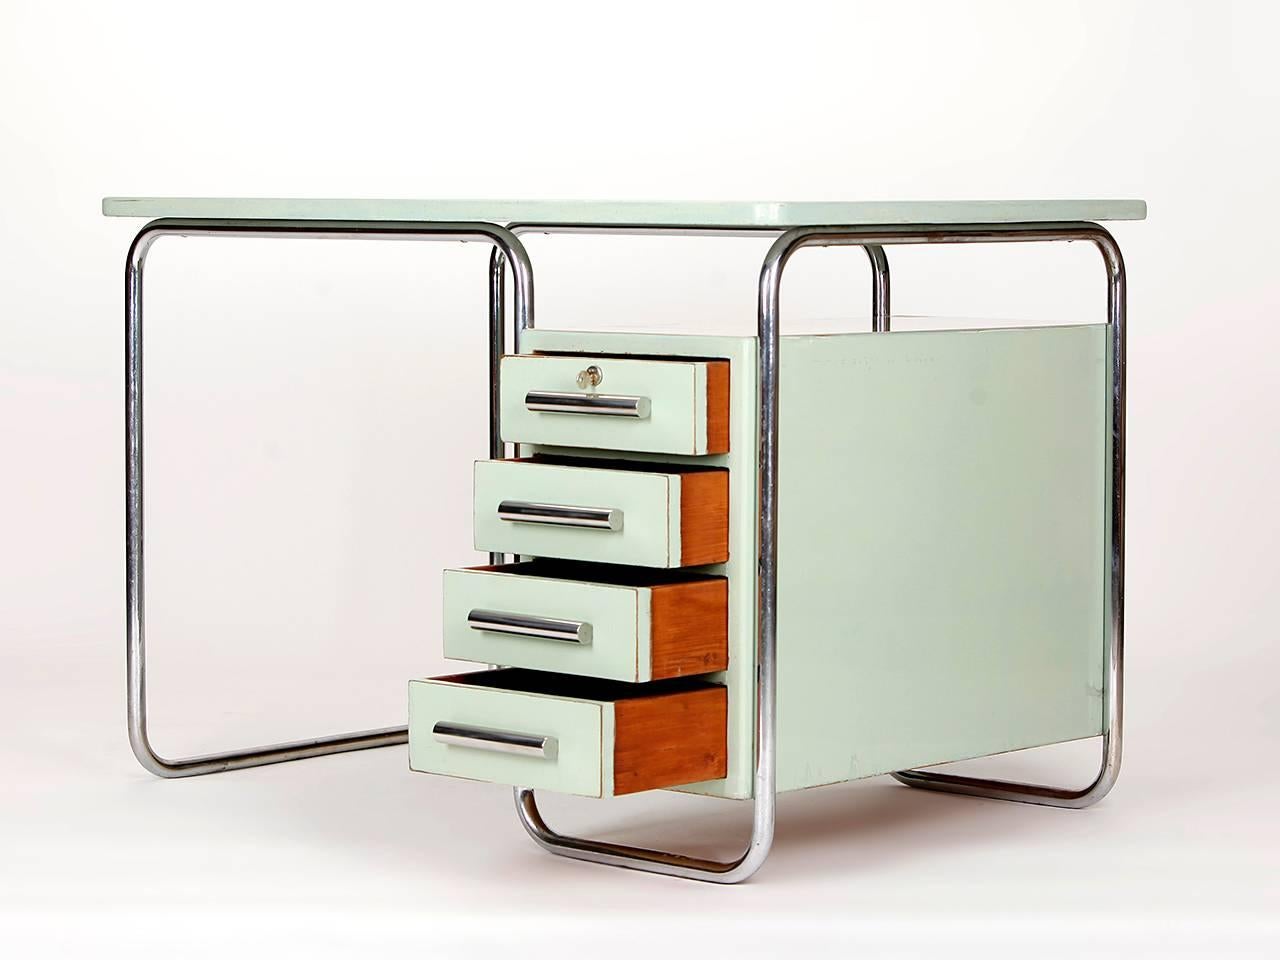 Desk with a frame in tubular chromed steel. Manufactured by Vichr & Co., Prague, in the 1930s.
Very good original condition with original varnish. Tubular steel with original chrome plating and patina. Fully cleaned.

We offer shop to door